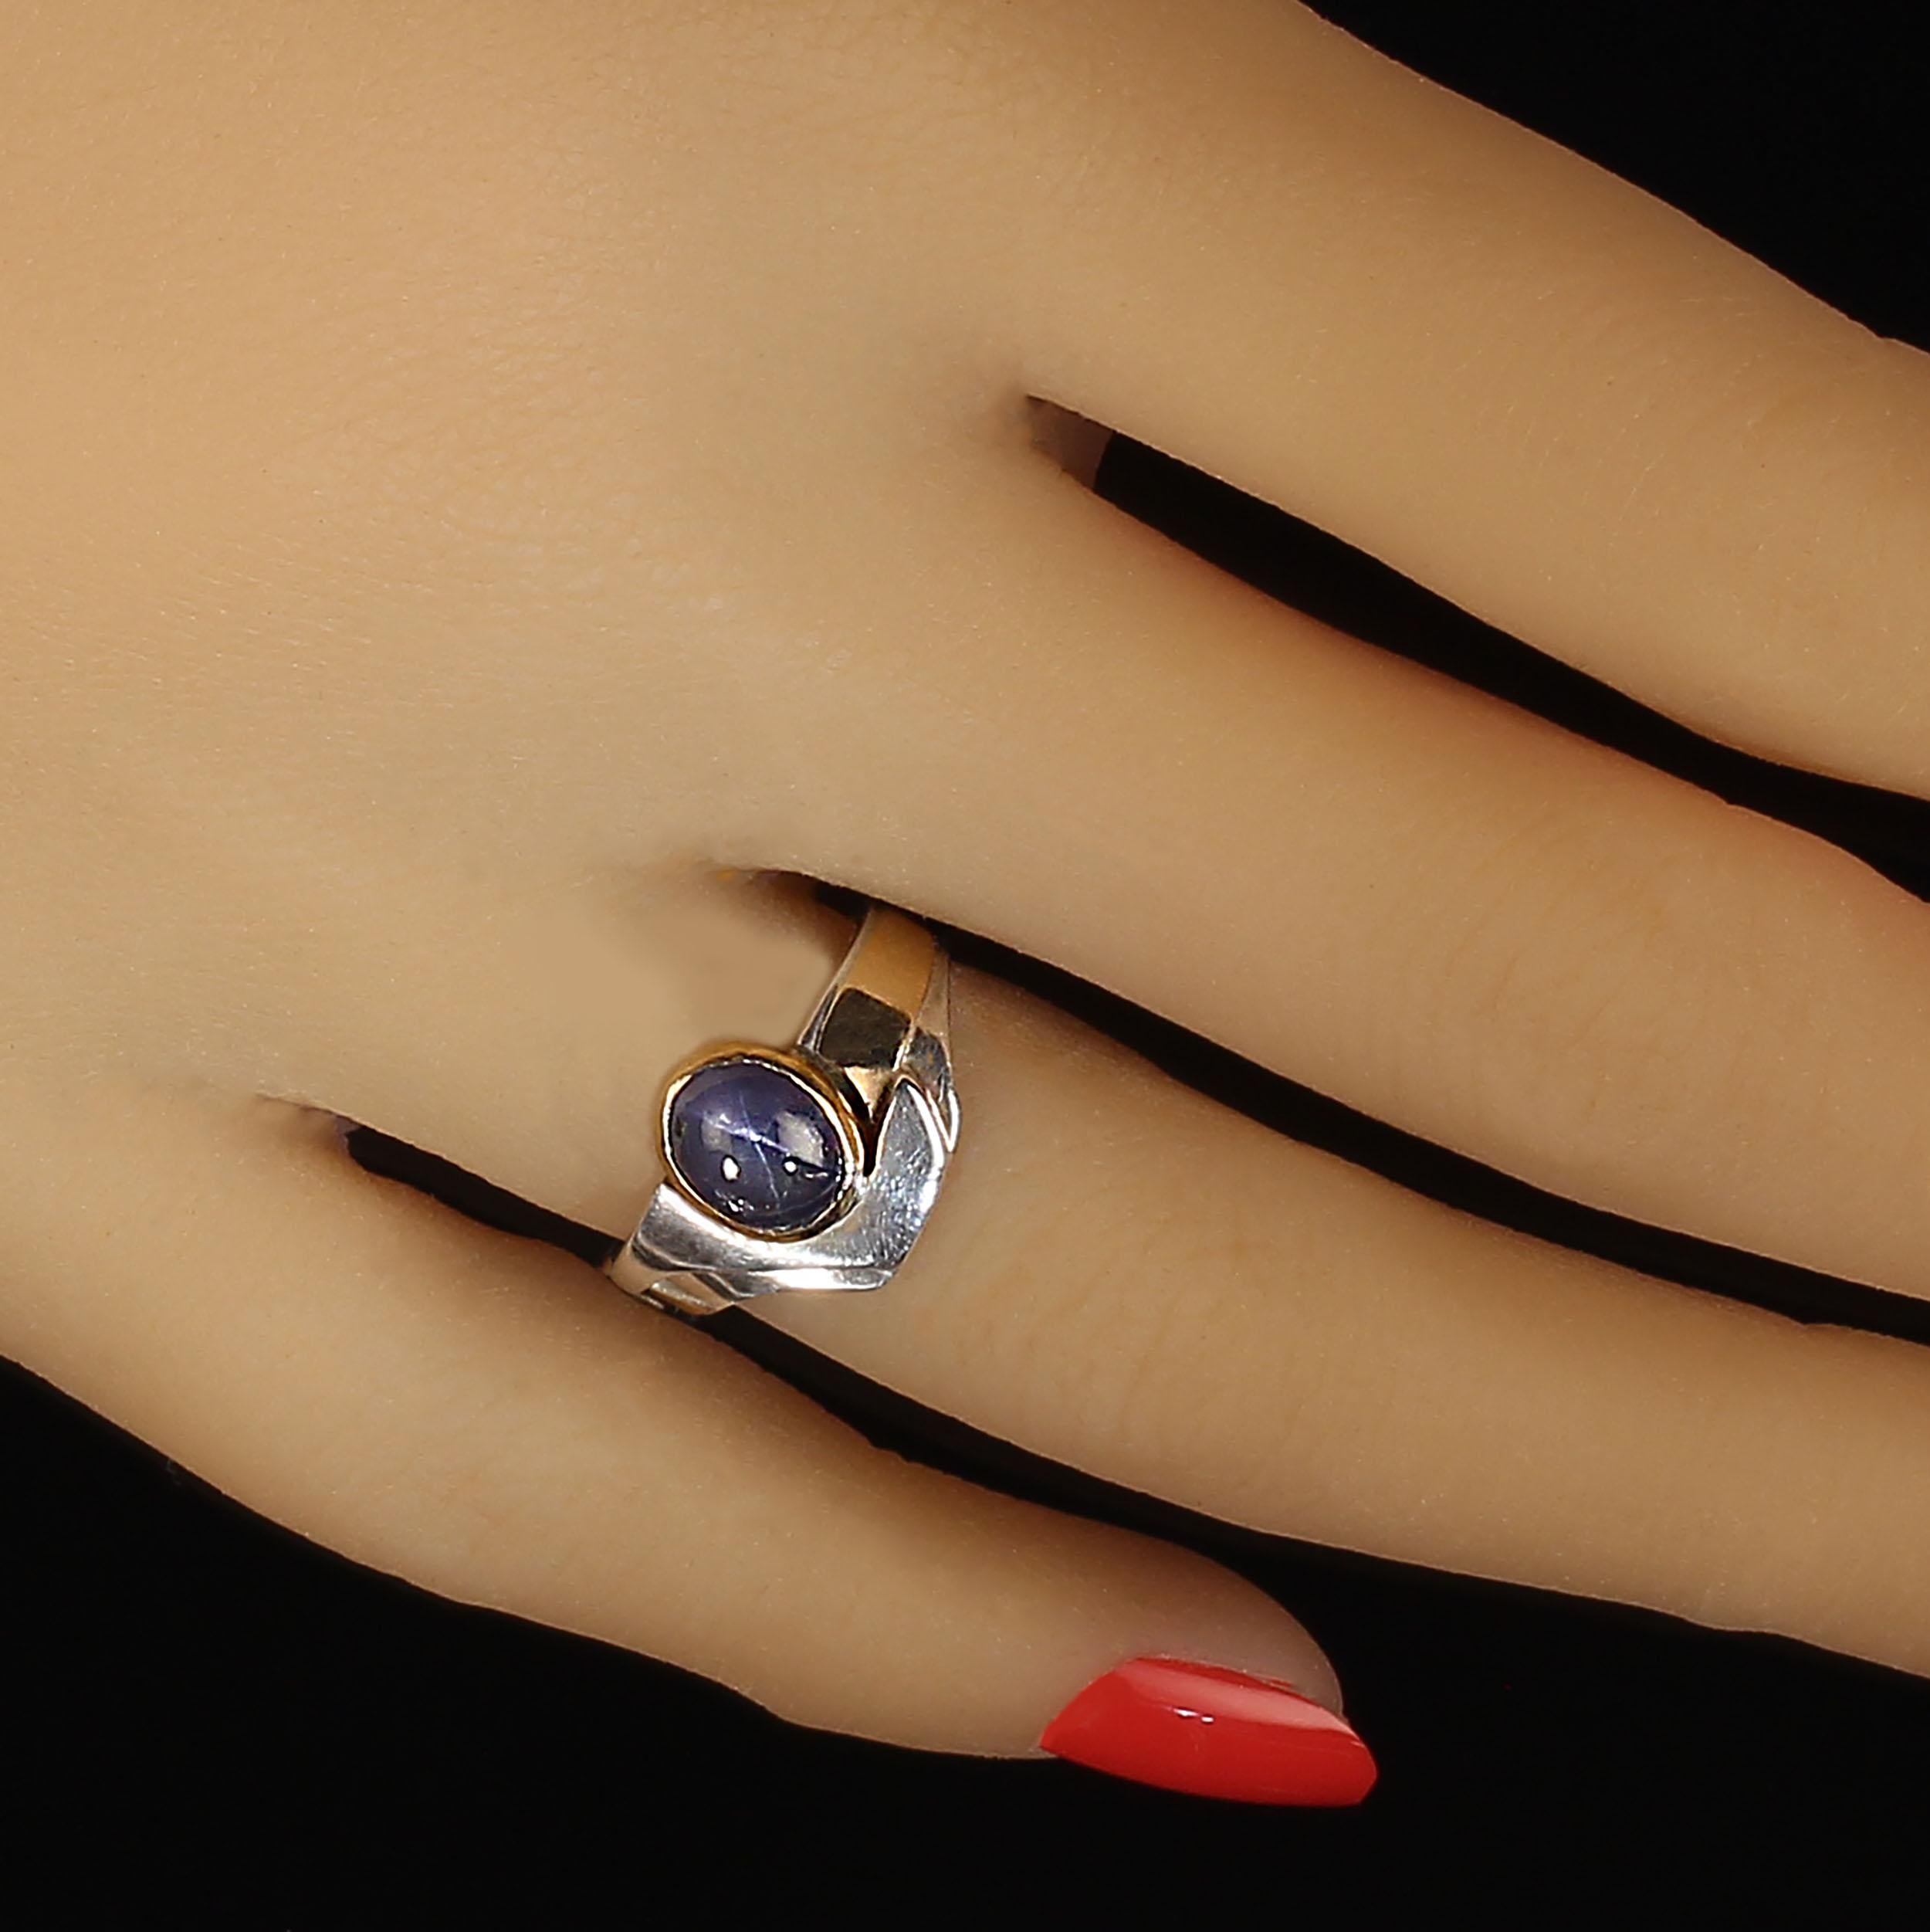 One of a kind blue star sapphire set in 18K gold bezel with 18K trim on sterling silver band.  This unique handmade ring was created in Brazil. The elegant simplicity of this ring is something you will want to add to your collection. Sizable 4.5 by